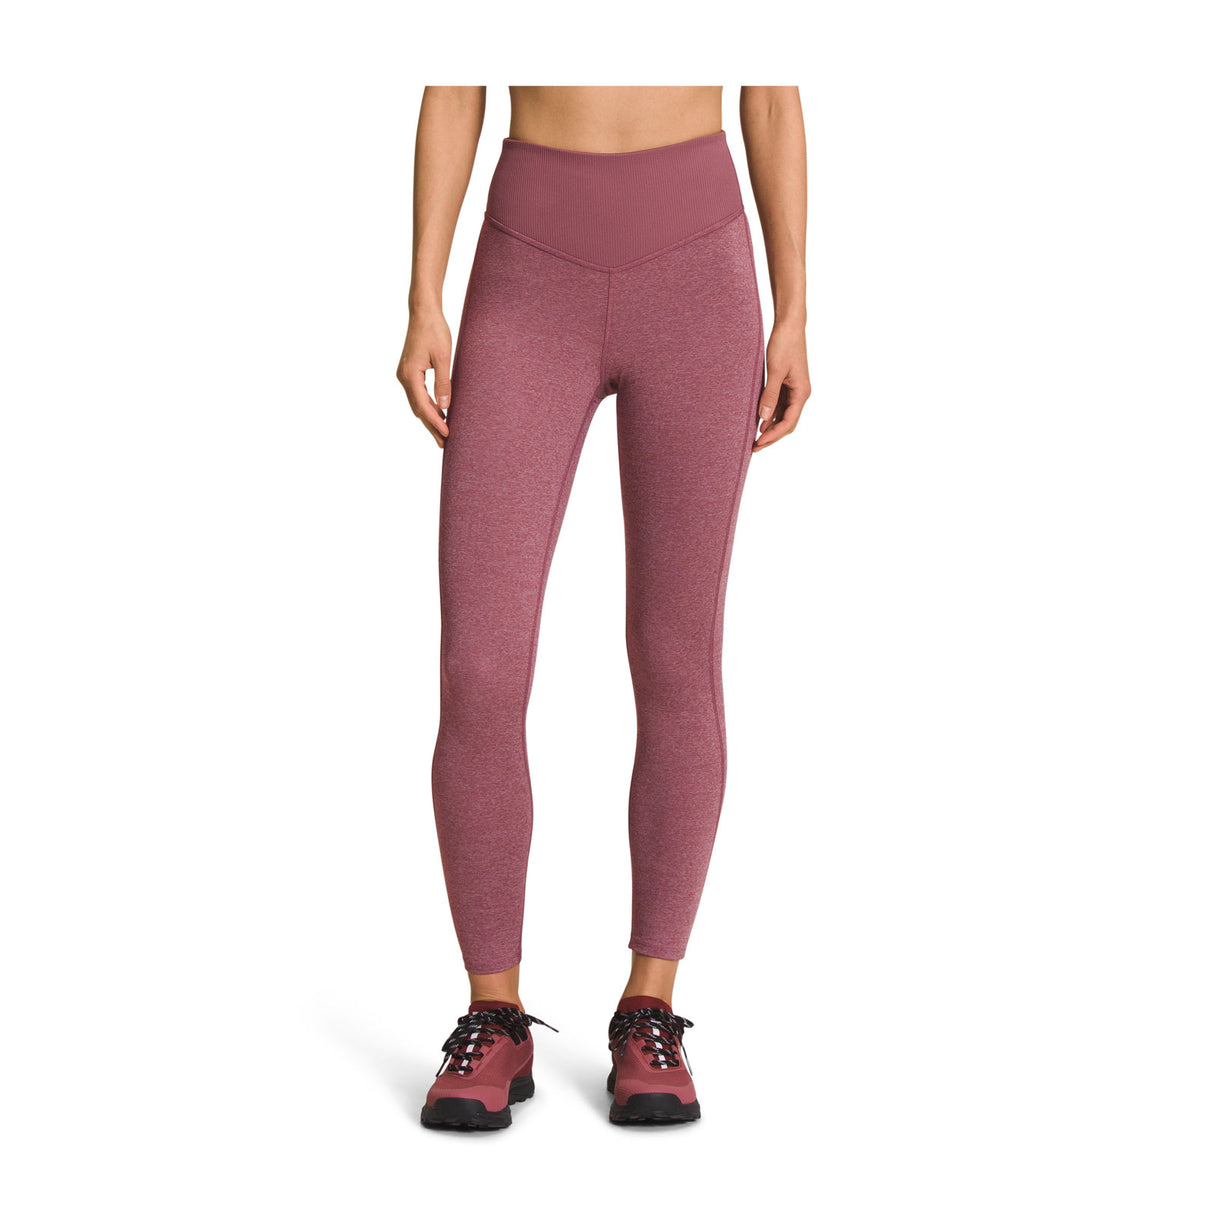 THE NORTH FACE WOMENS BRIDGEWAY TIGHT – Wind River Outdoor